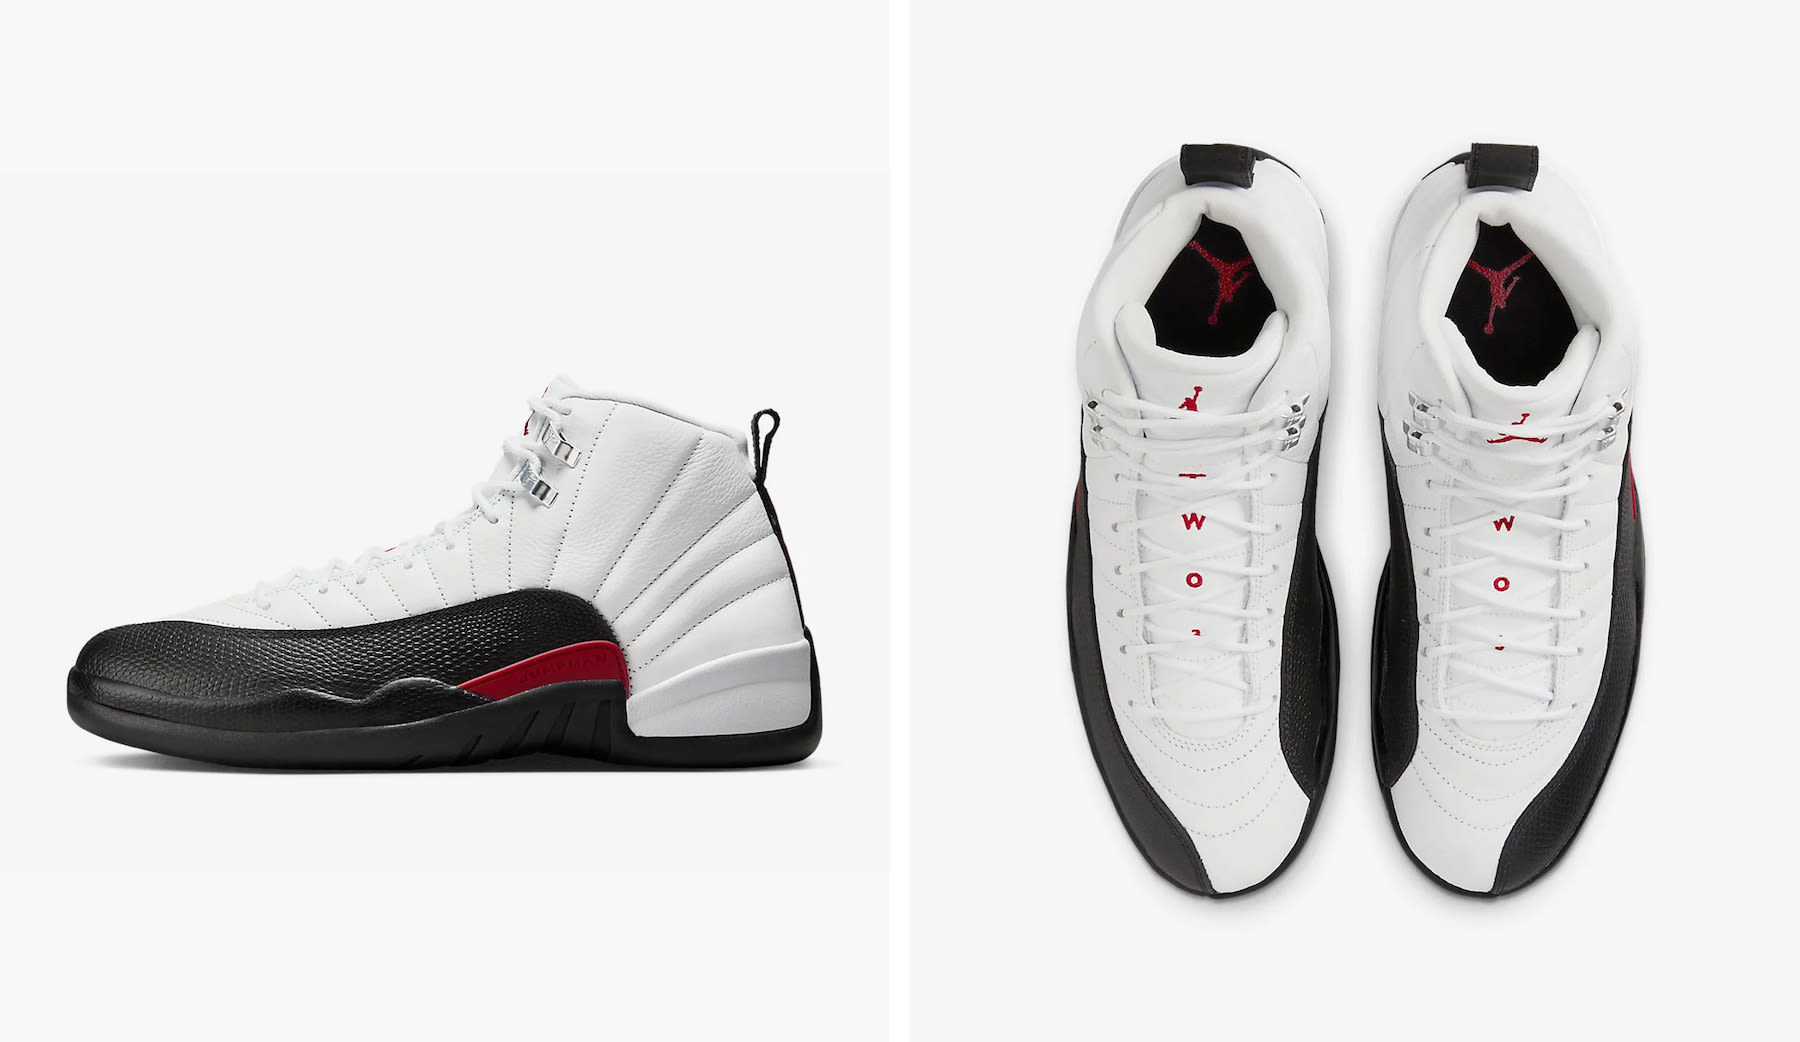 The Remixed Air Jordan 12 ‘Red Taxi’ Sneaker Will Release in May